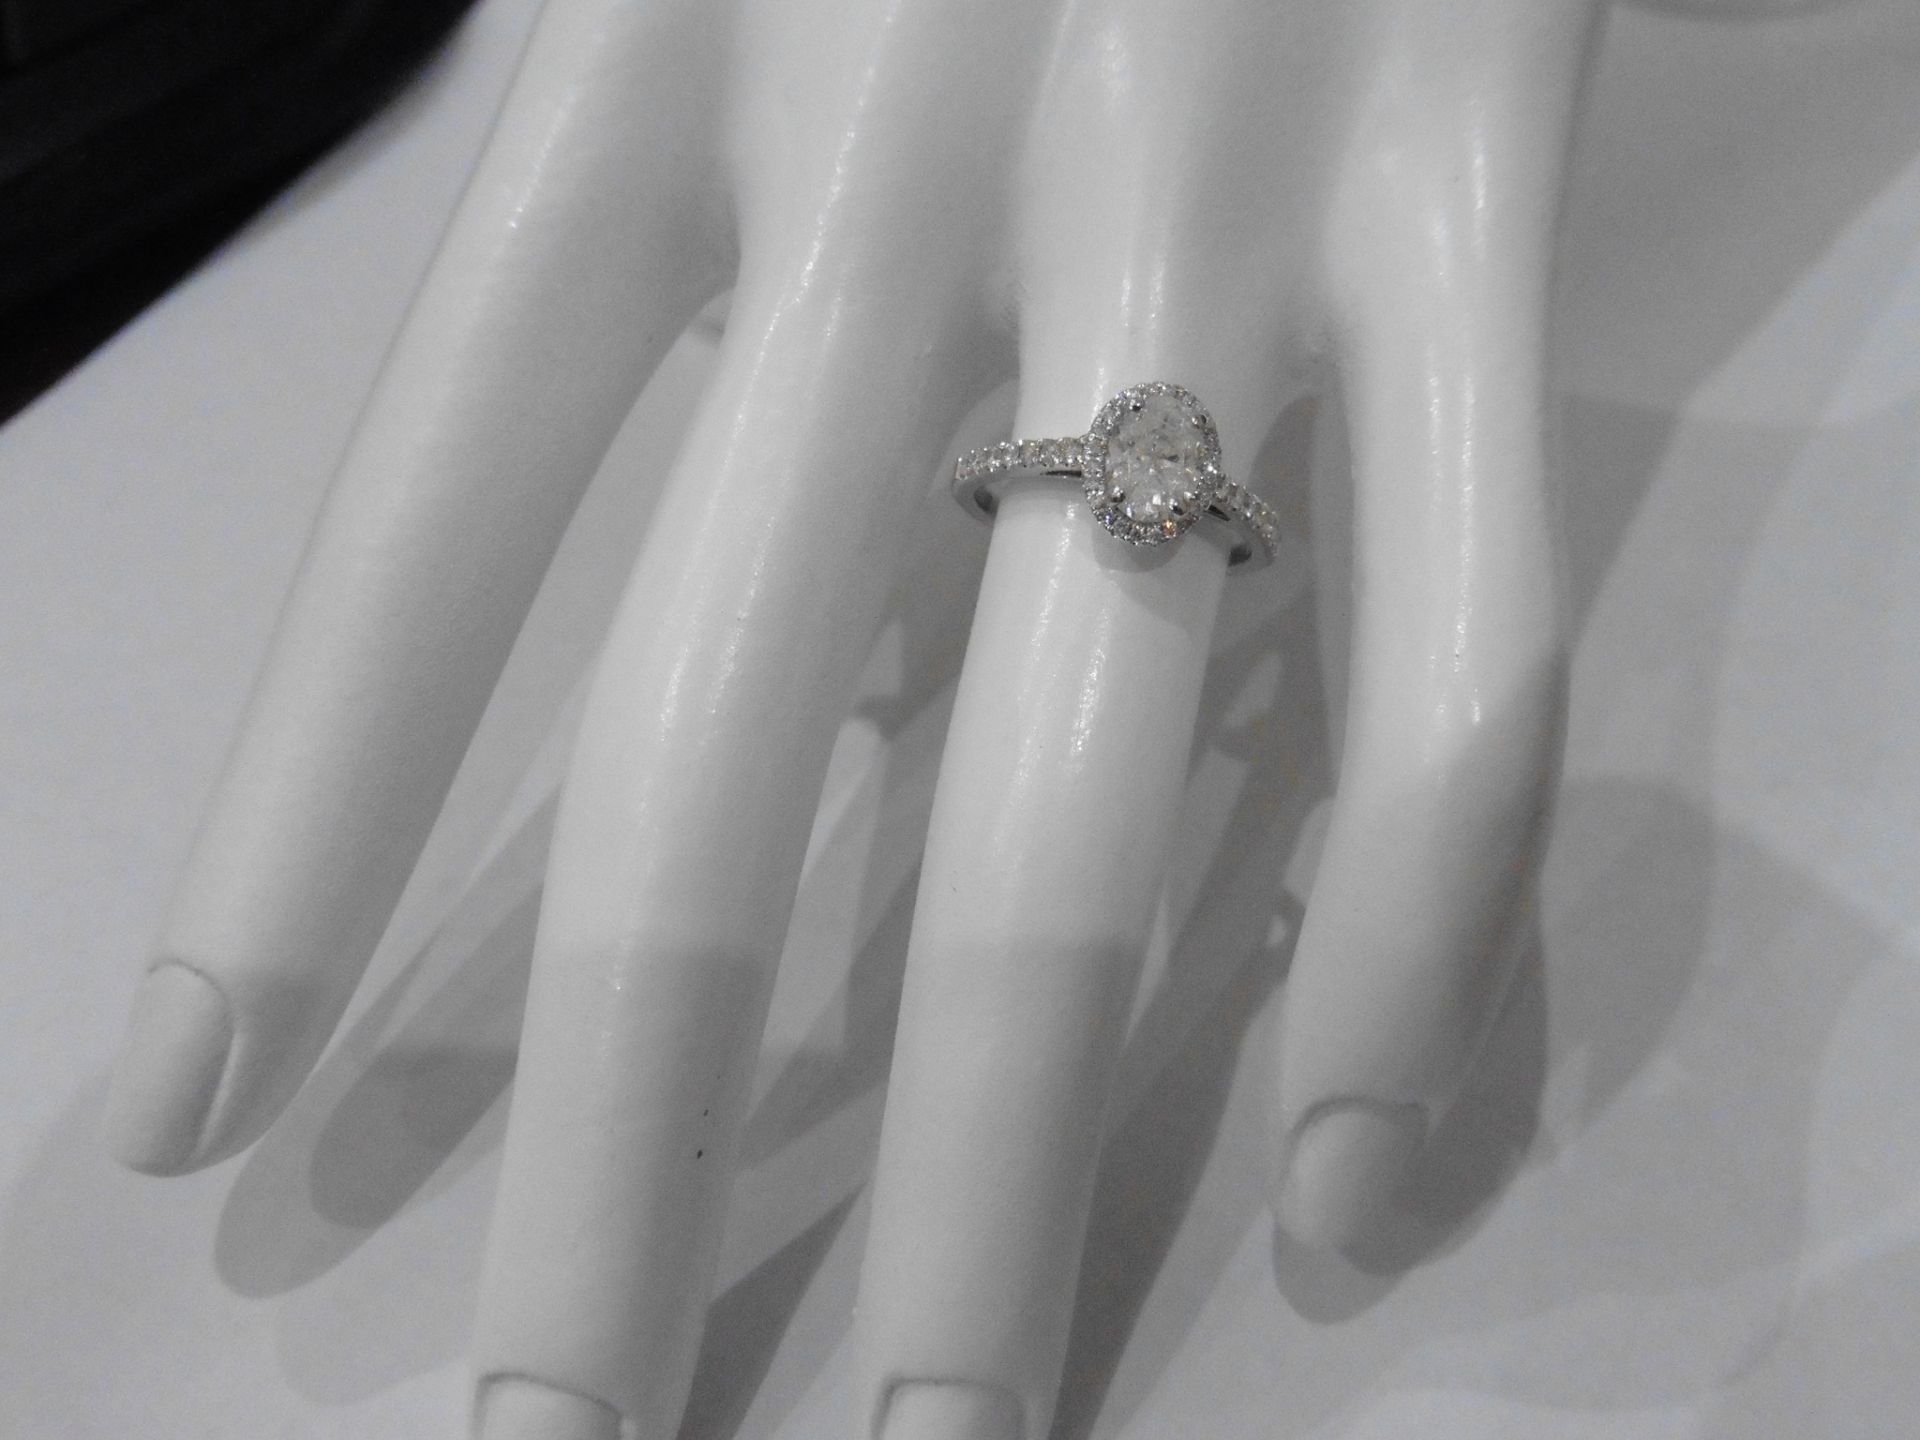 0.84ct oval diamond set solitaire ring. Centre diamond G/H colour, Si3 clarity. Halo setting of - Image 5 of 5